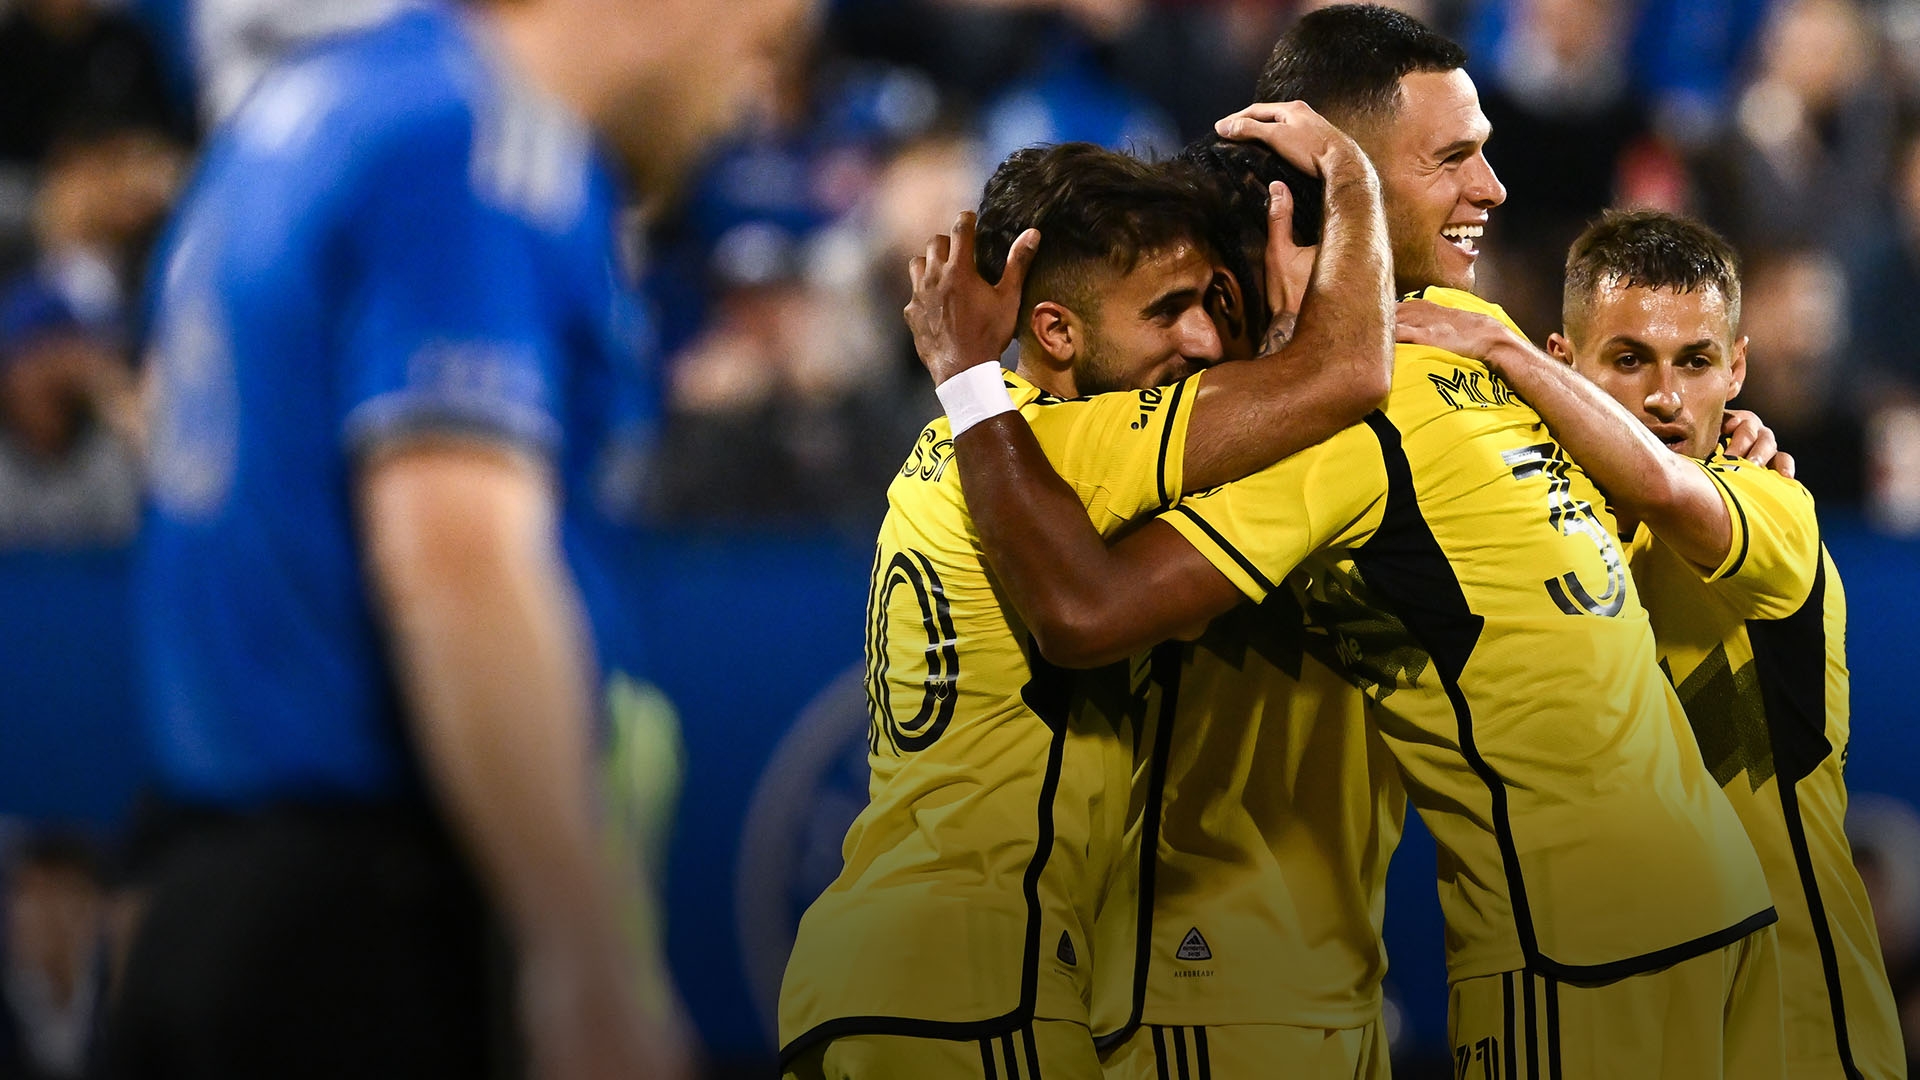 Can Columbus Crew save MLS from Champions Cup embarrassment?